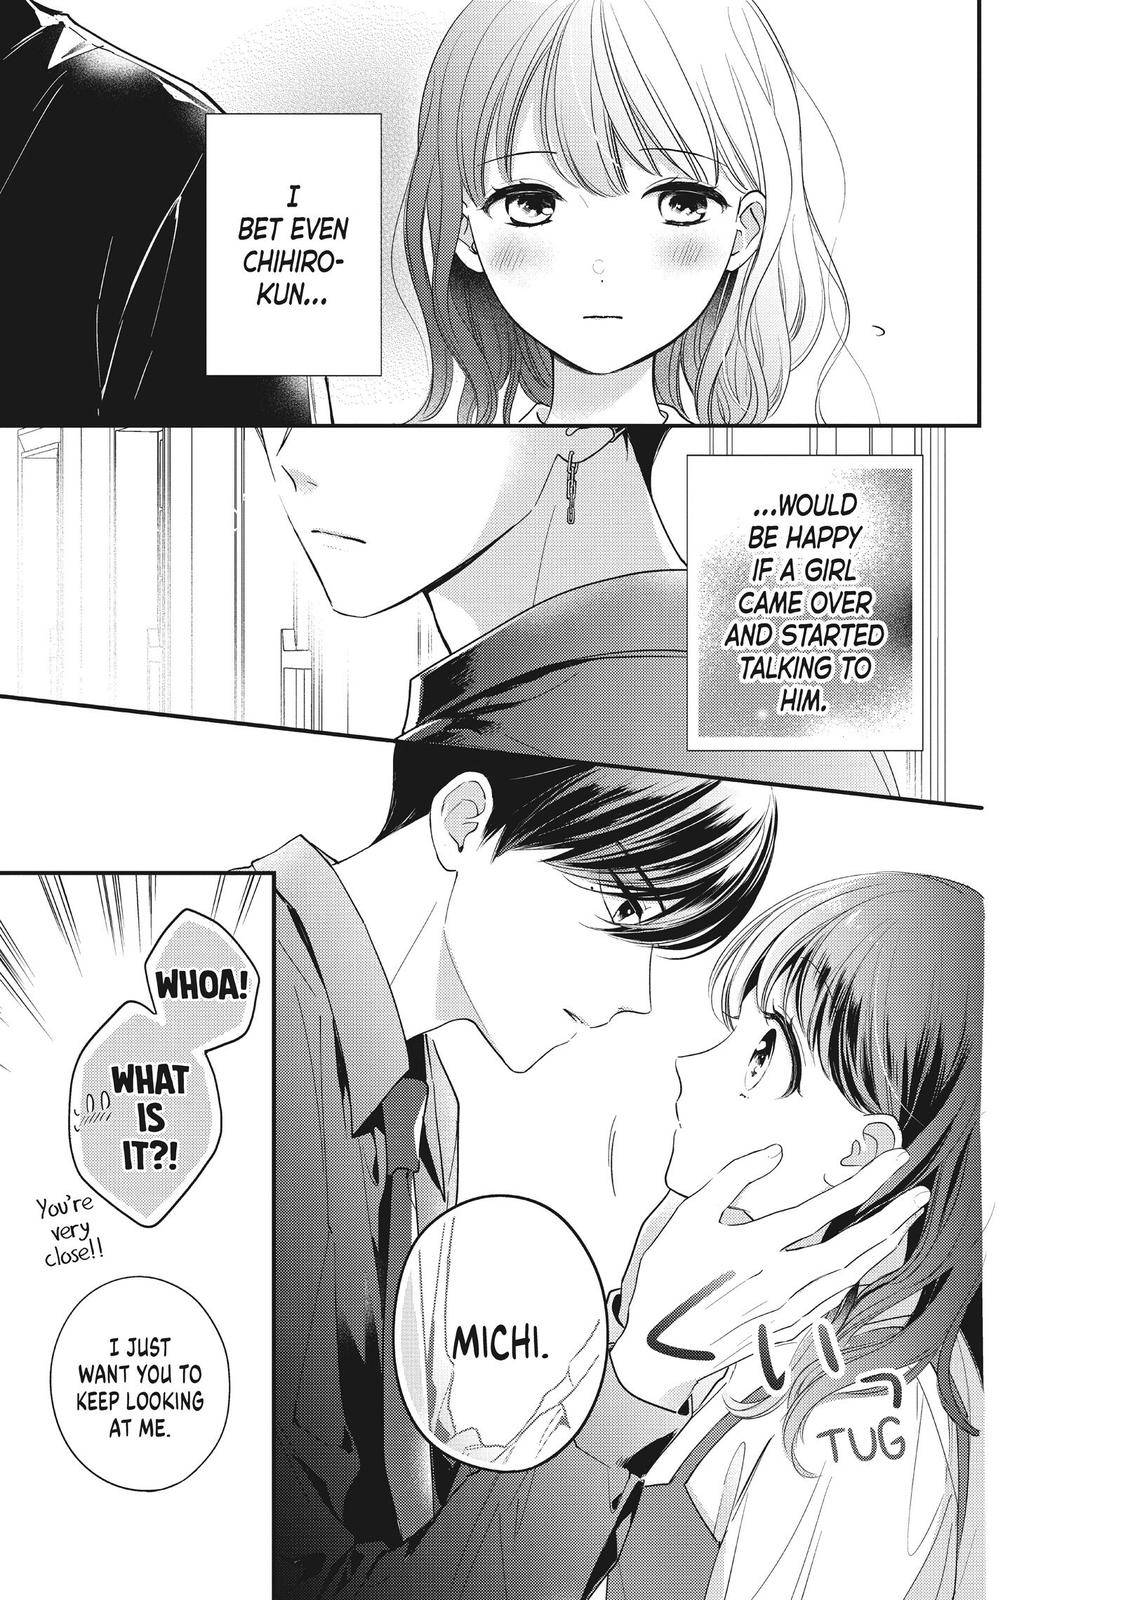 Chihiro-kun Only Has Eyes for Me - chapter 19 - #5